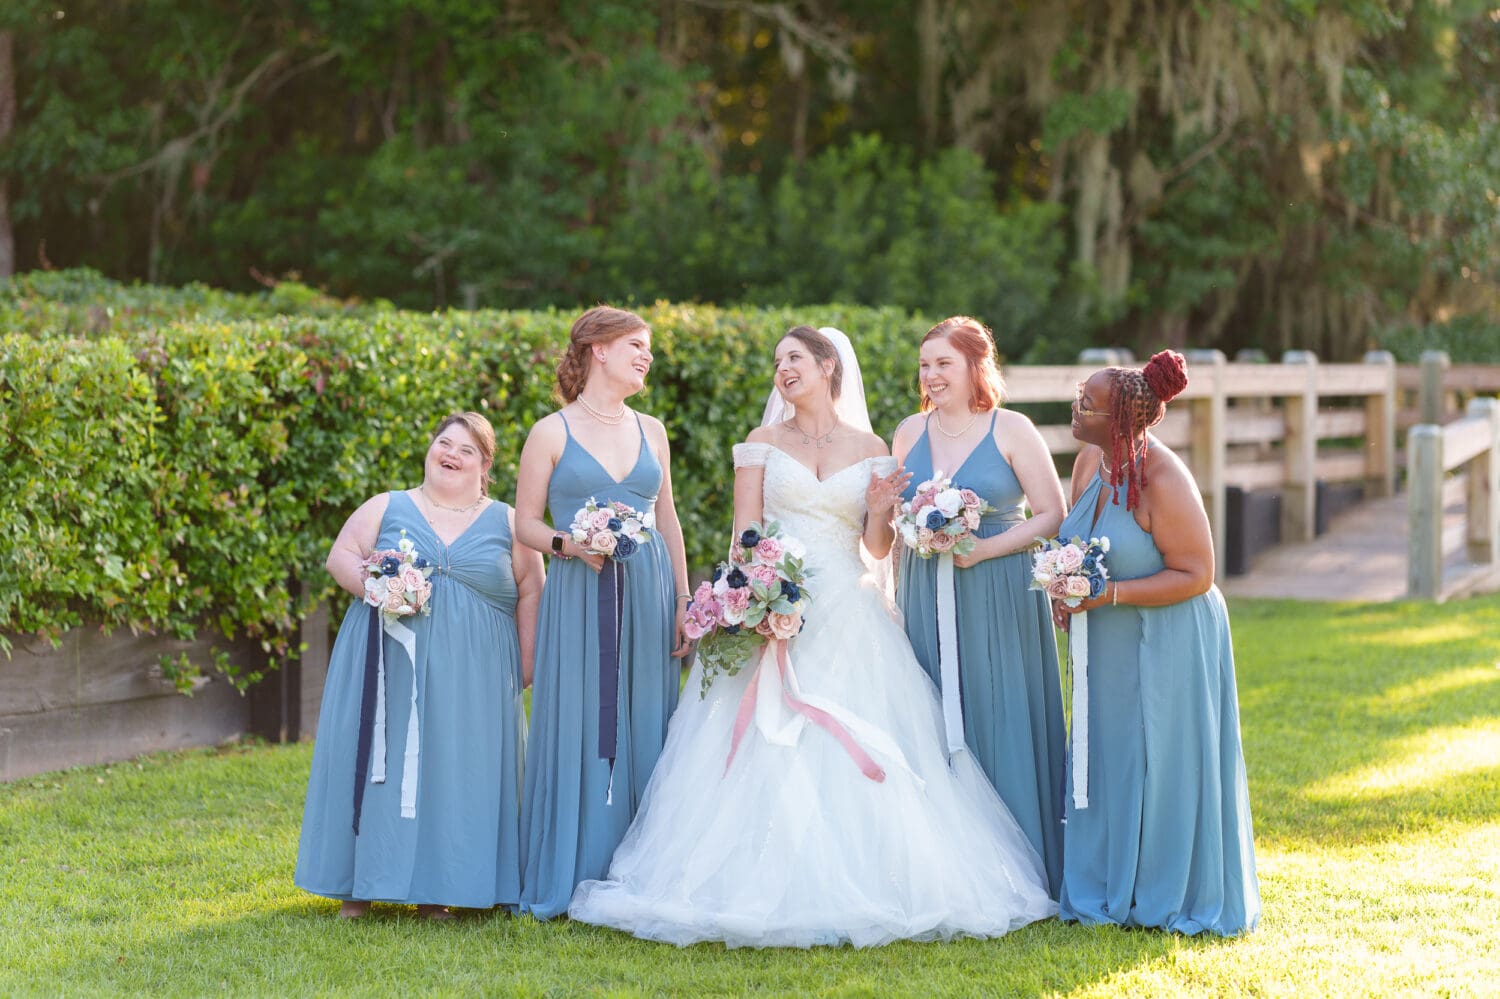 Portraits with the bridesmaids - The Pavilion at Pepper Plantation